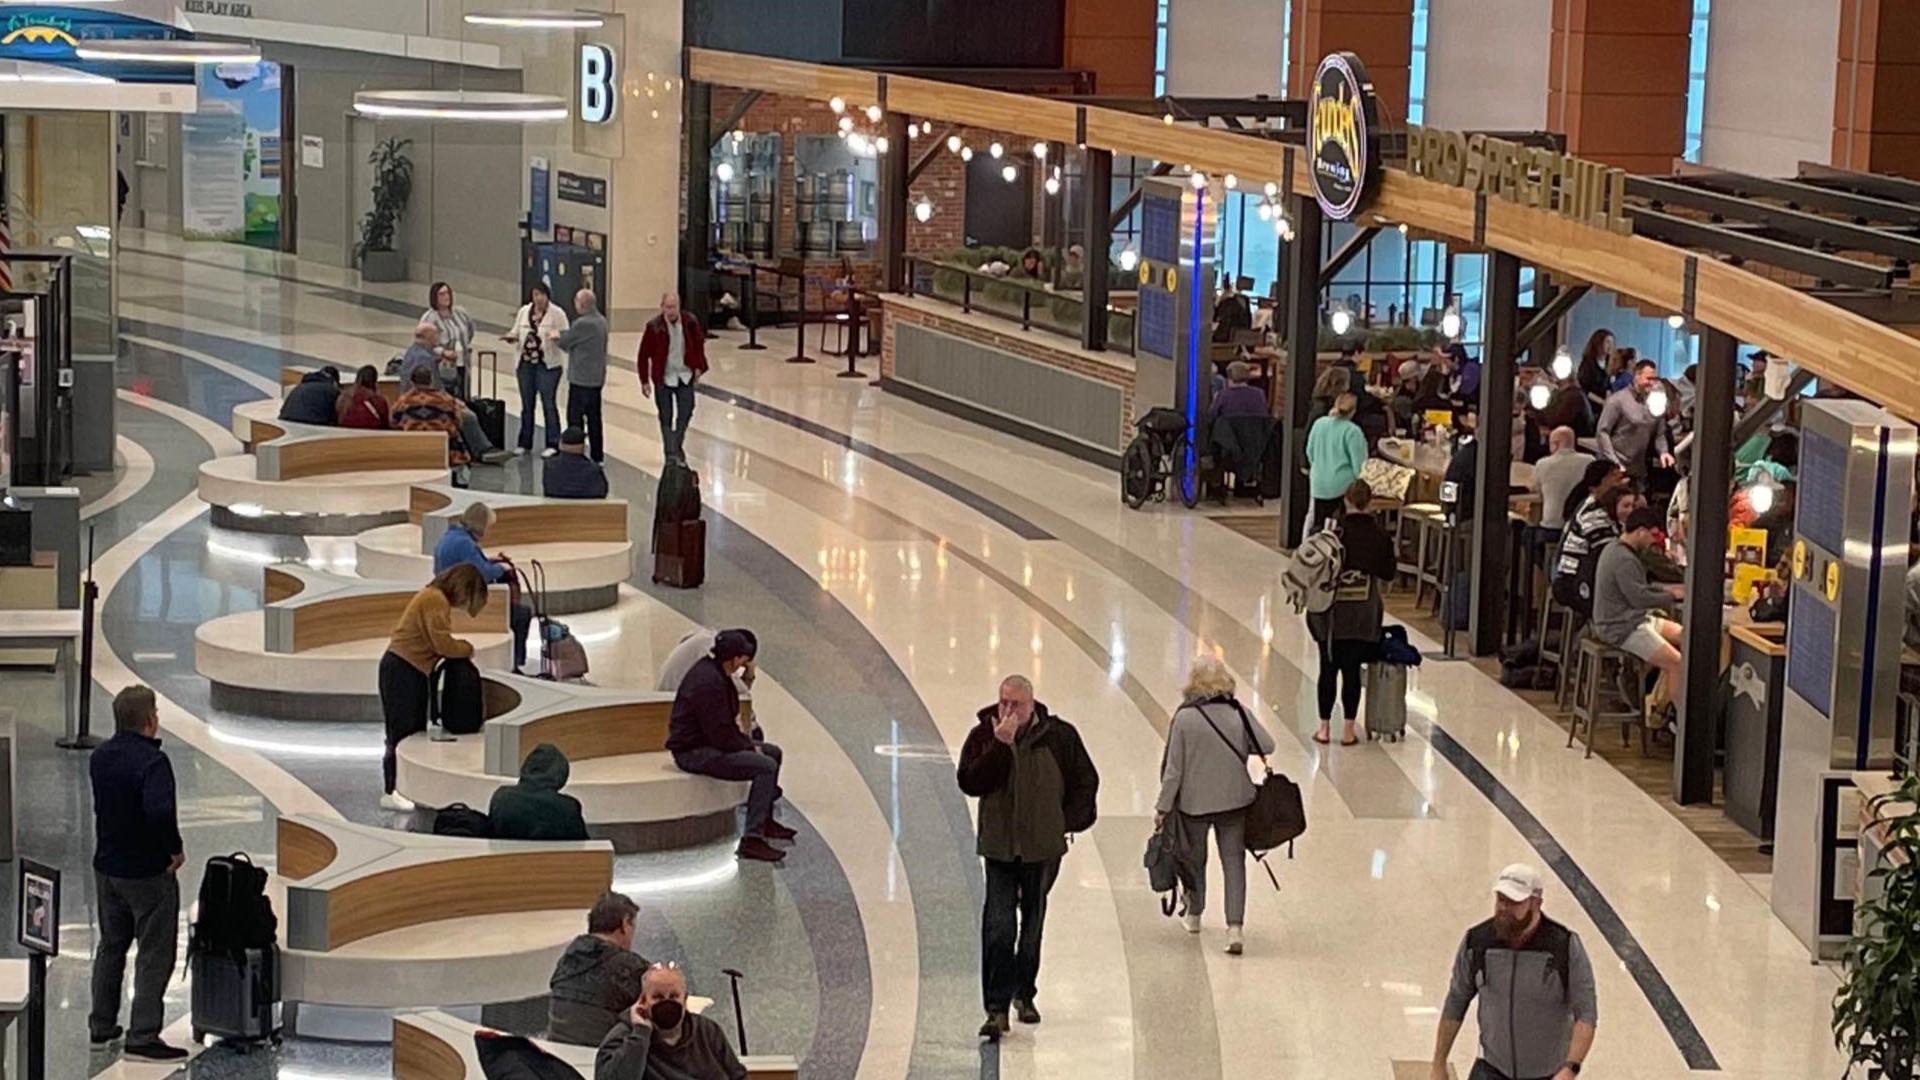 The majority of flights at the Gerald R. Ford Airport in Grand Rapids were grounded due to an FAA system issue.